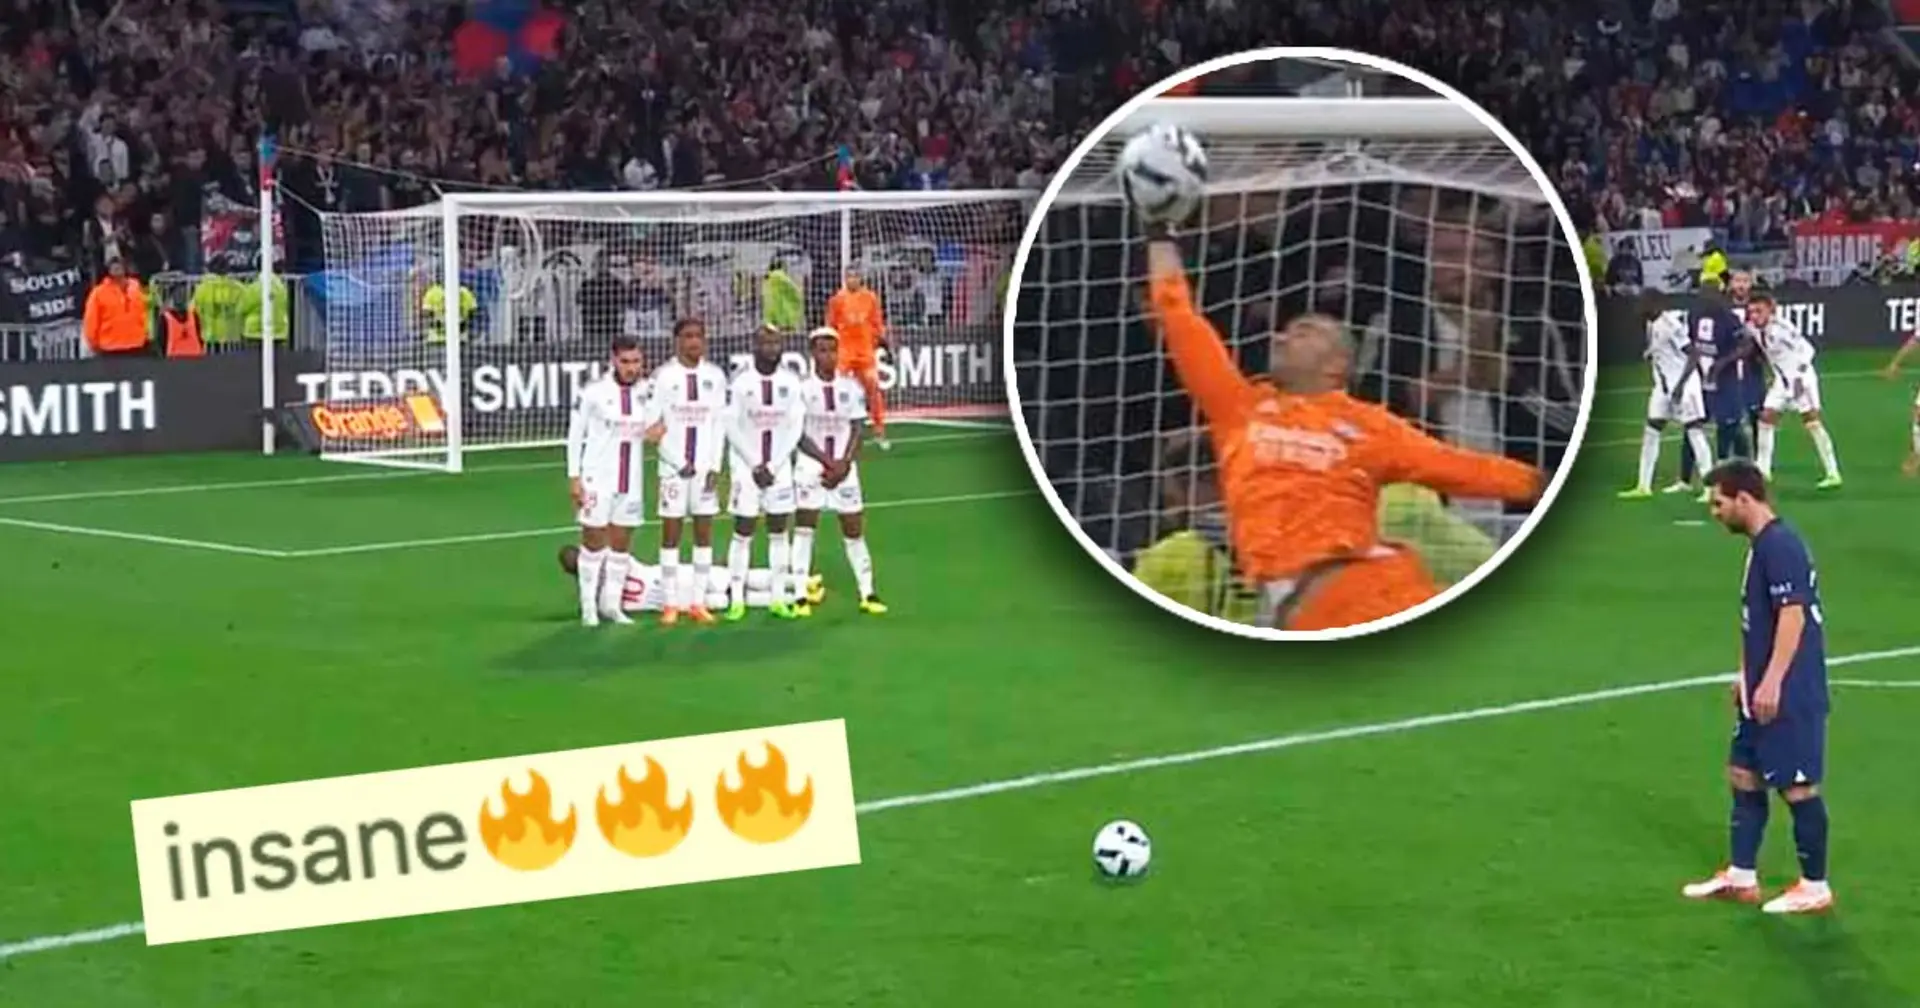 Why Messi's free kick v Lyon goes viral – even though he didn't score it